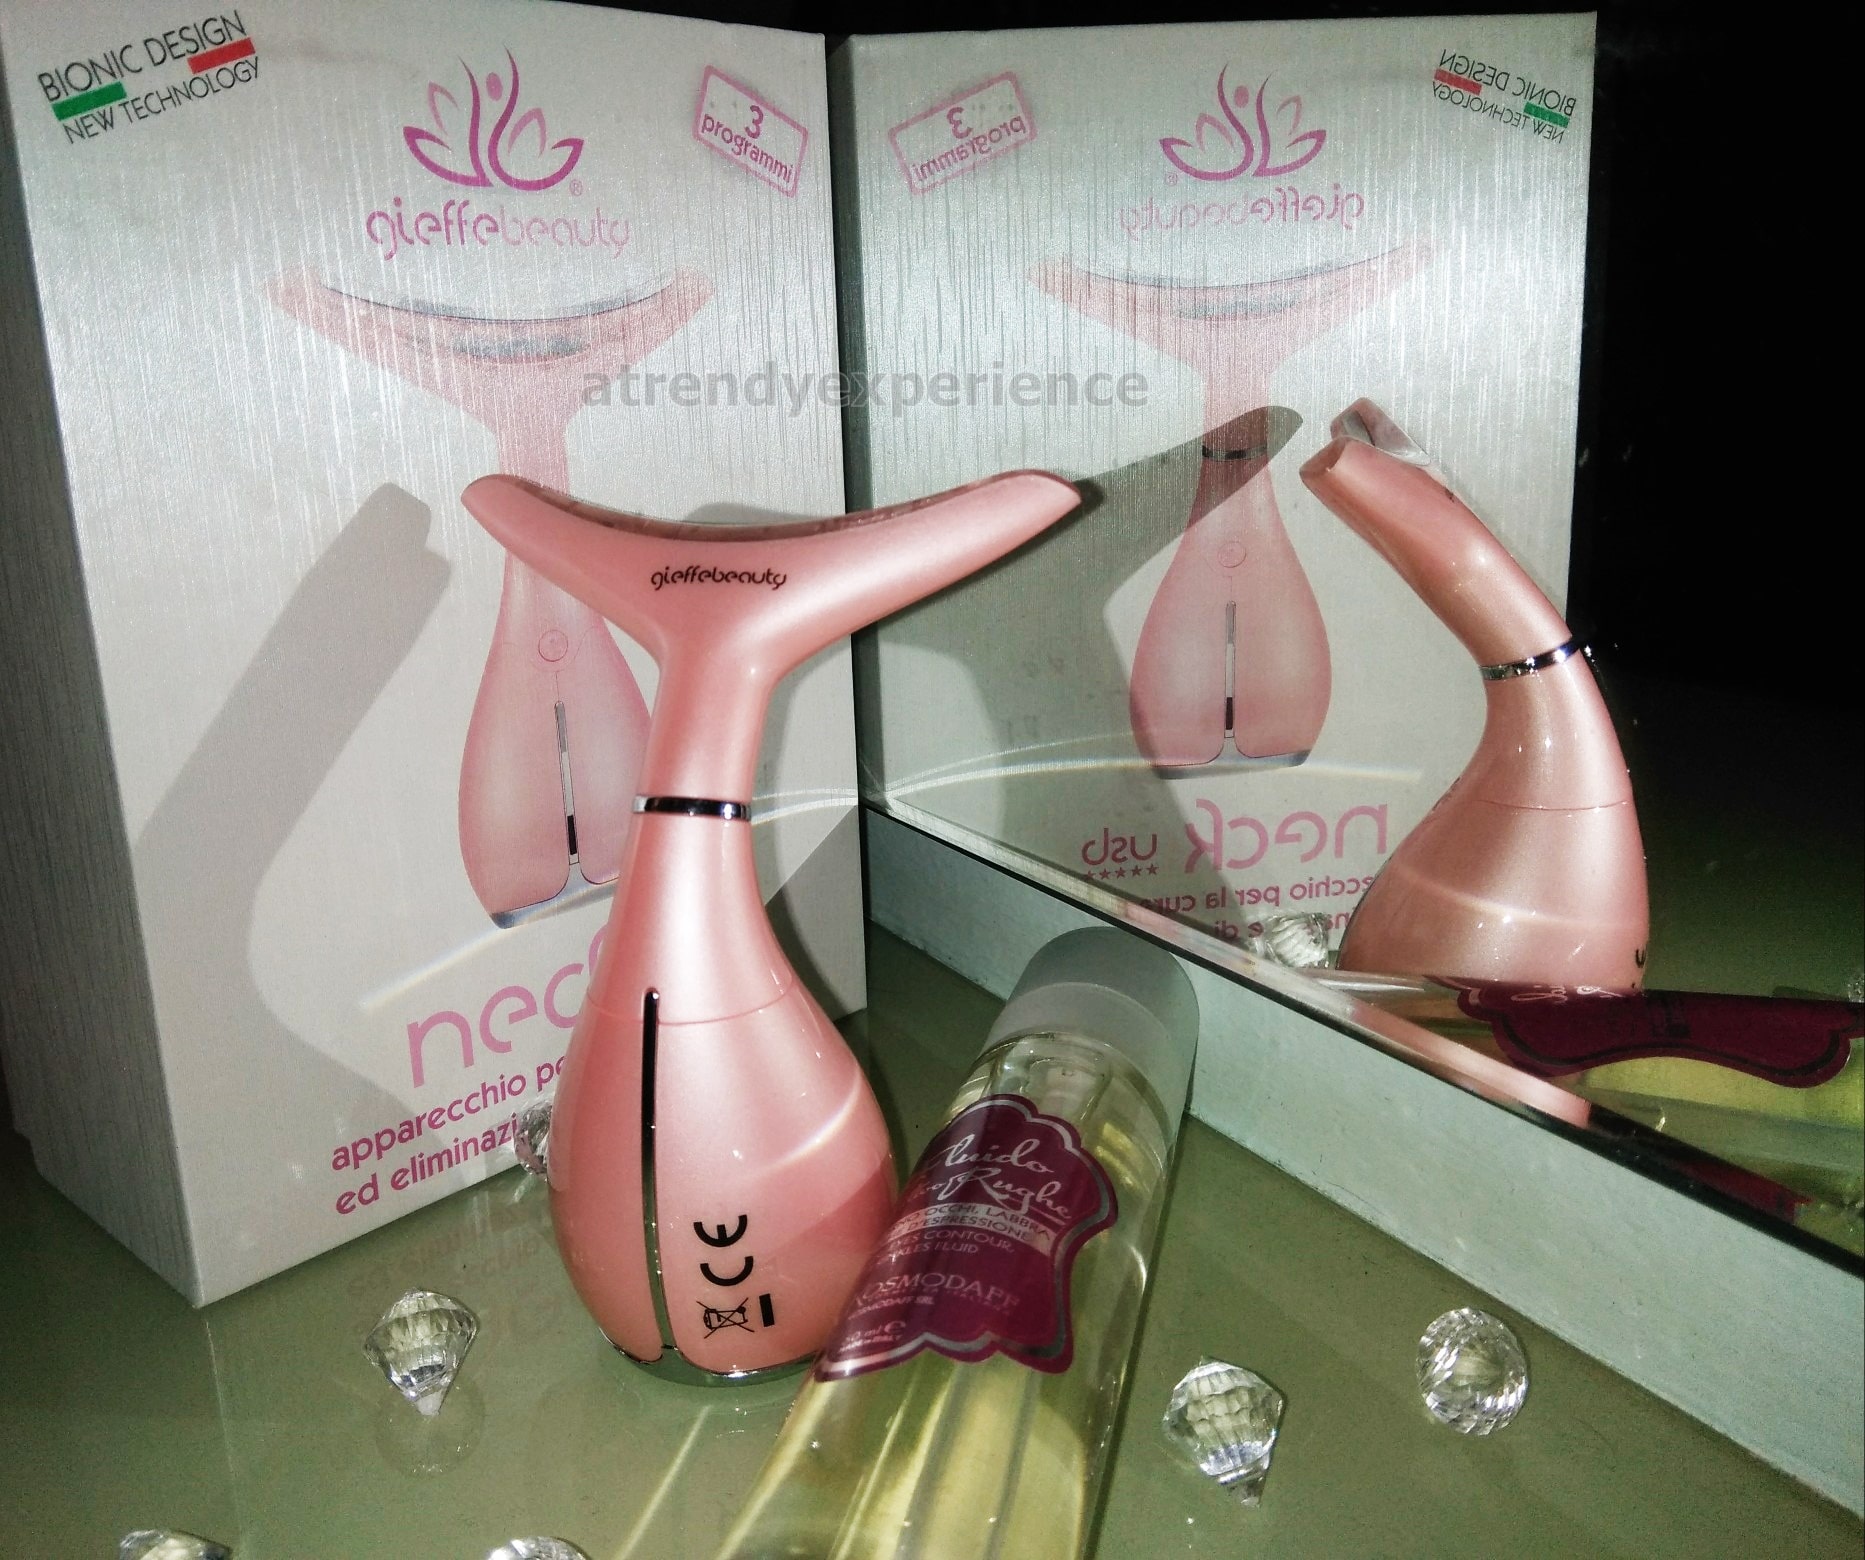 gieffebeauty neck recensione